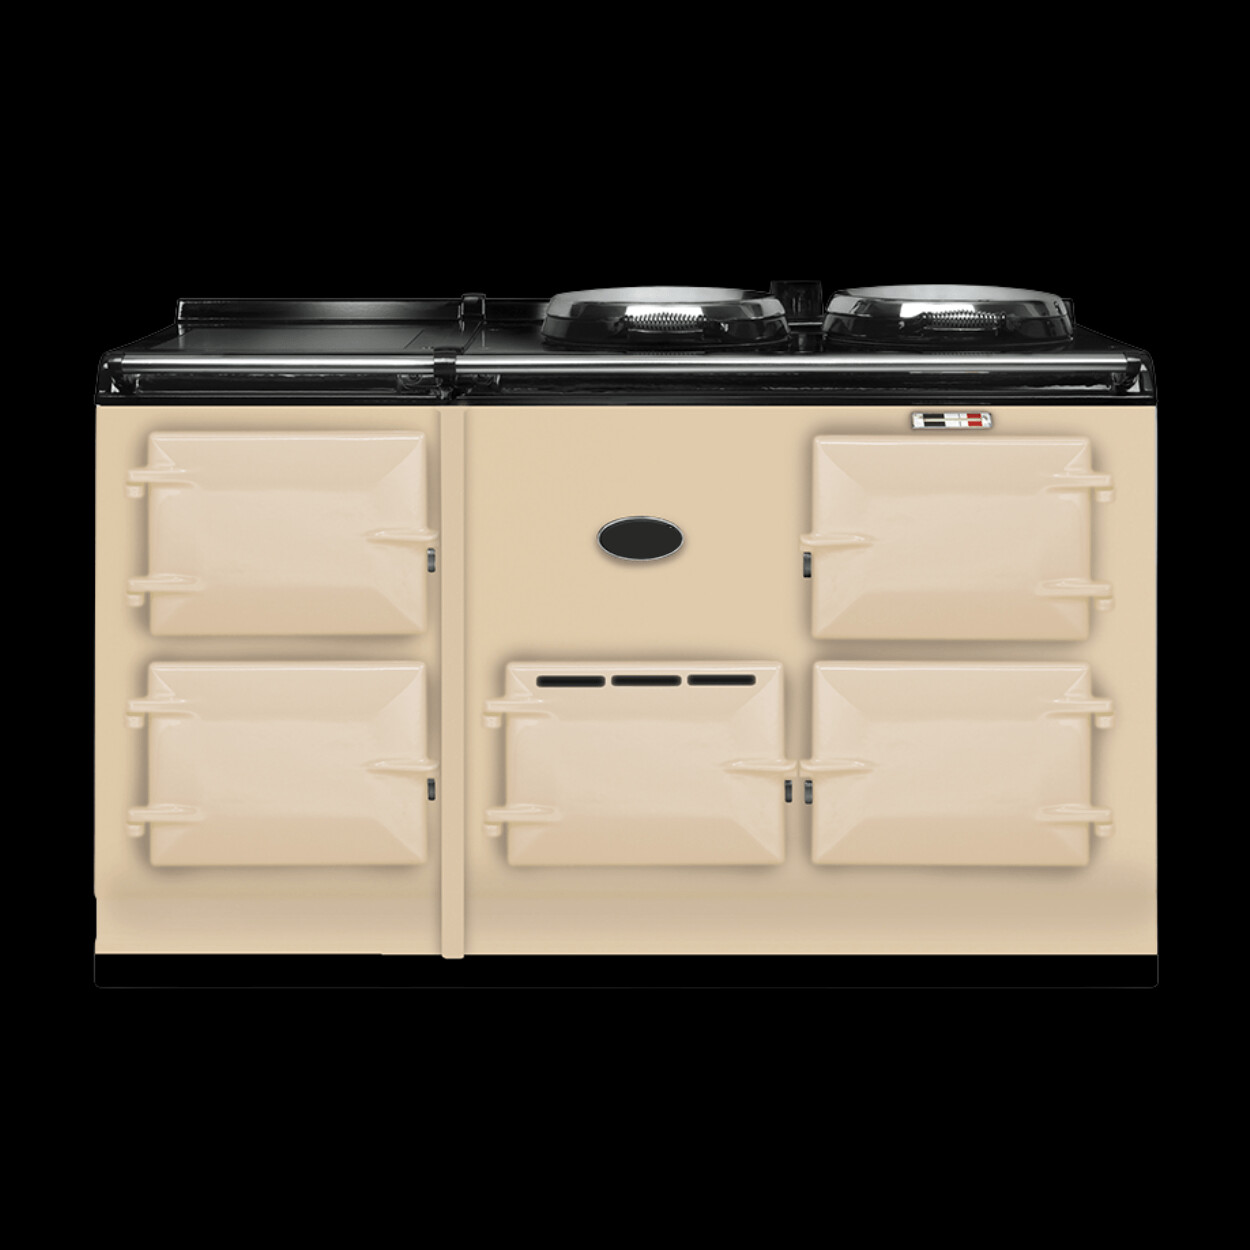 Reconditioned 4 Oven eControl Aga Cooker (Any Colour)